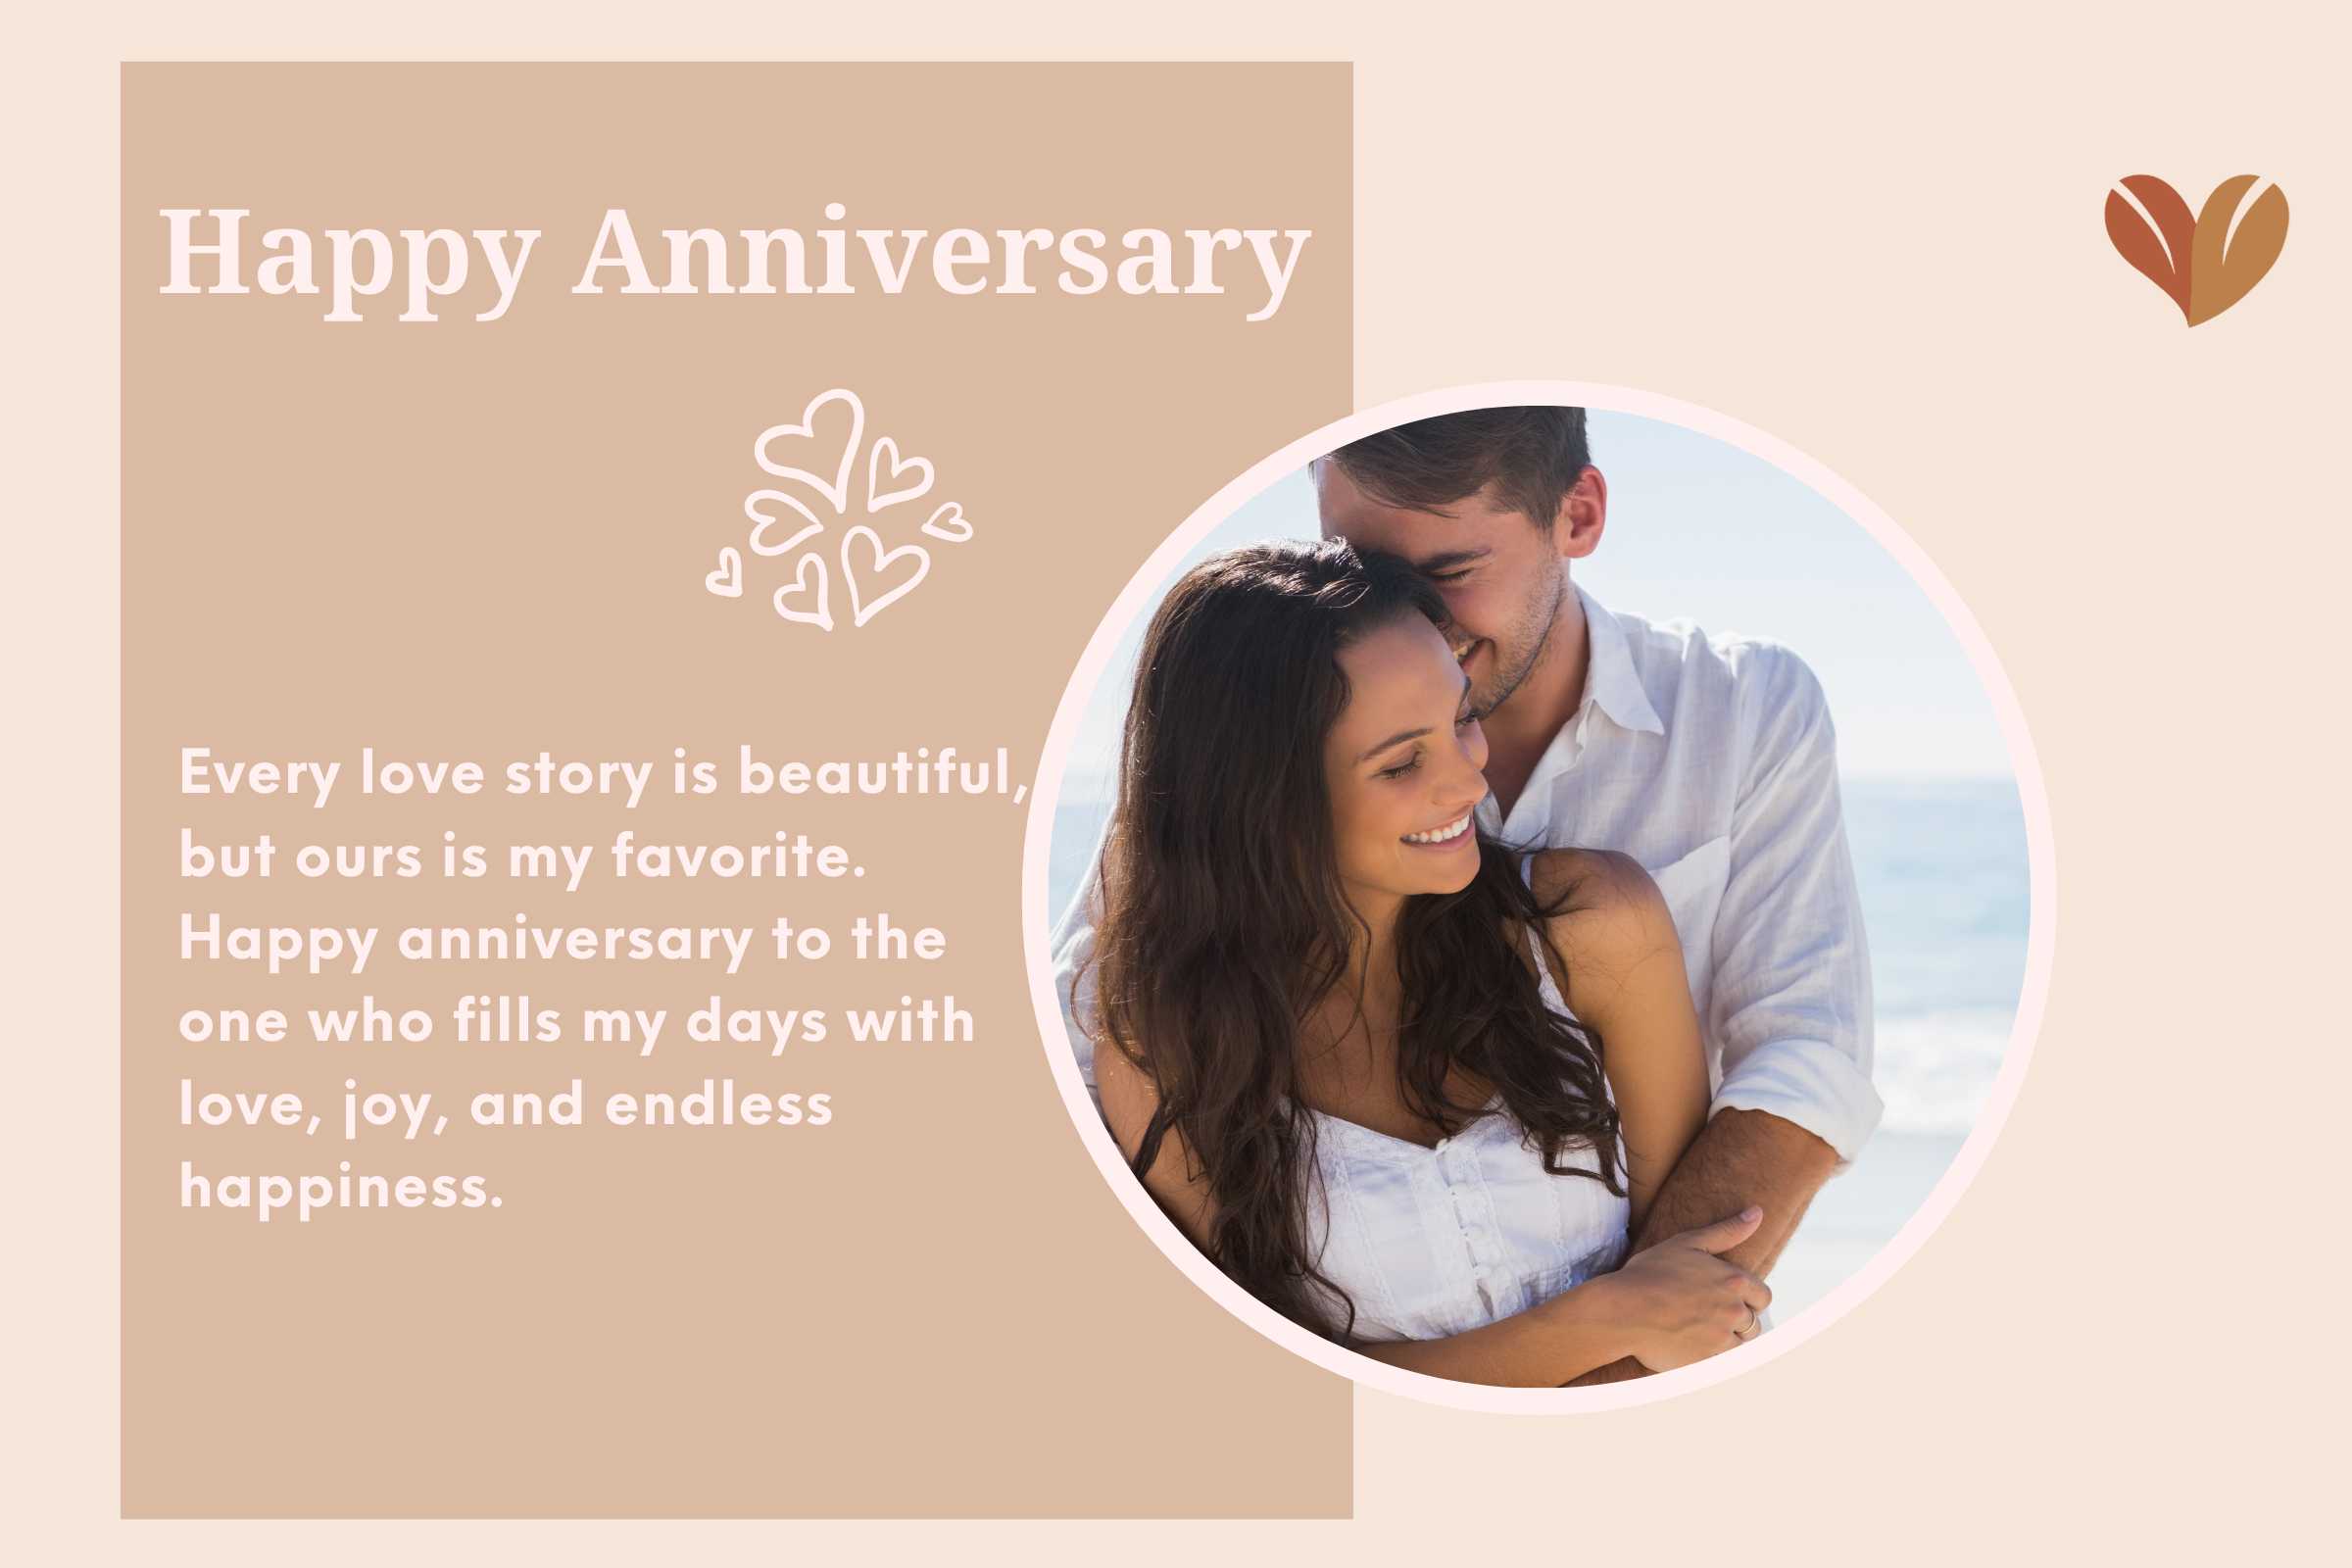 Express your love and admiration for your partner - Anniversary sayings